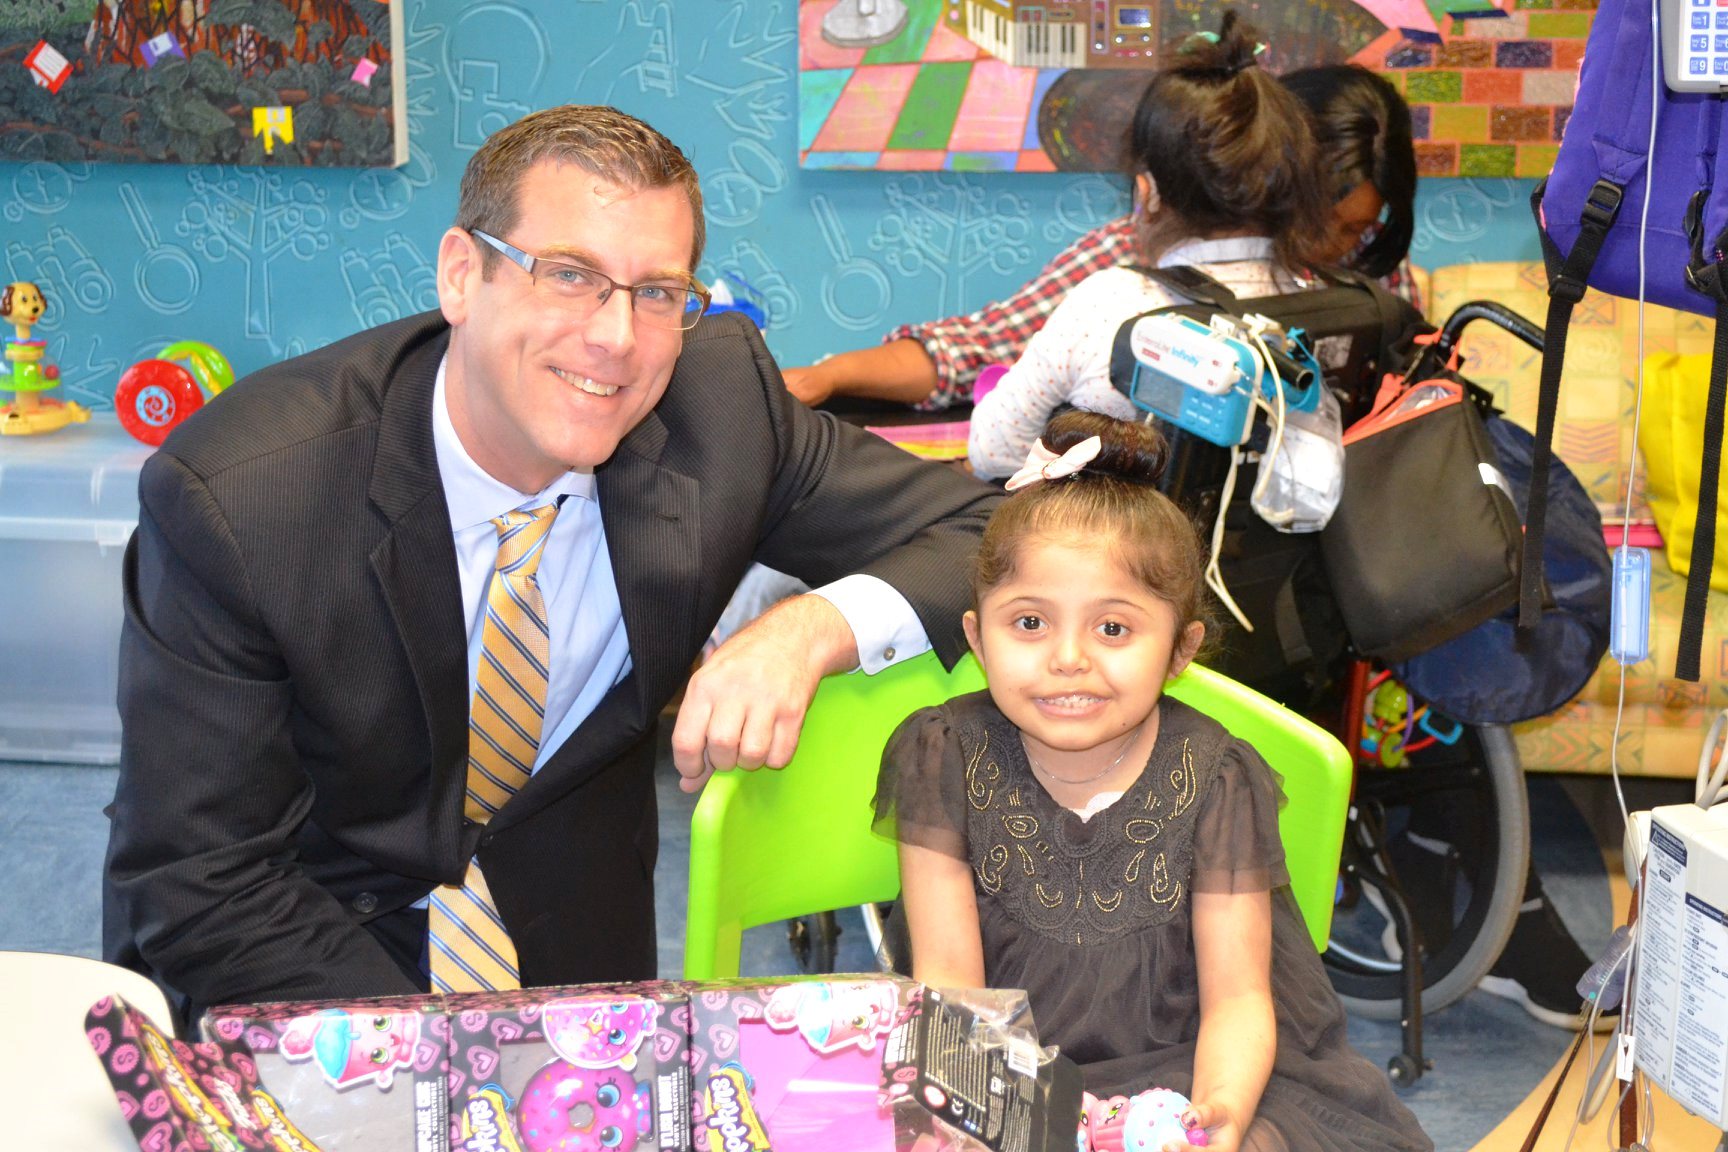 Assemblyman Braunstein is pictured distributing toys to children at St. Mary's Hospital for Children.